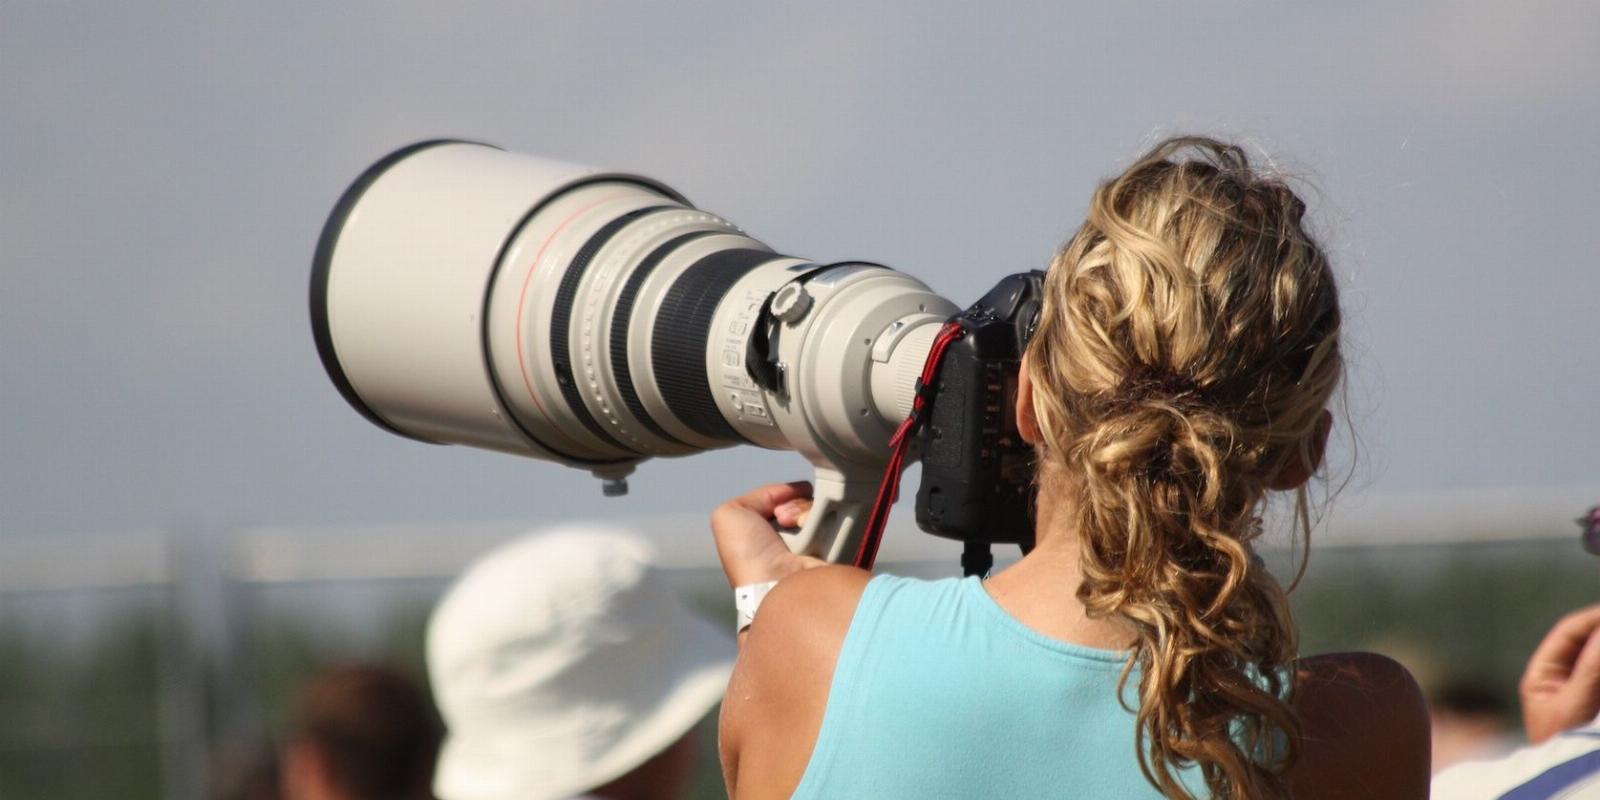 What Is a Telephoto Lens and What Would You Use One For?